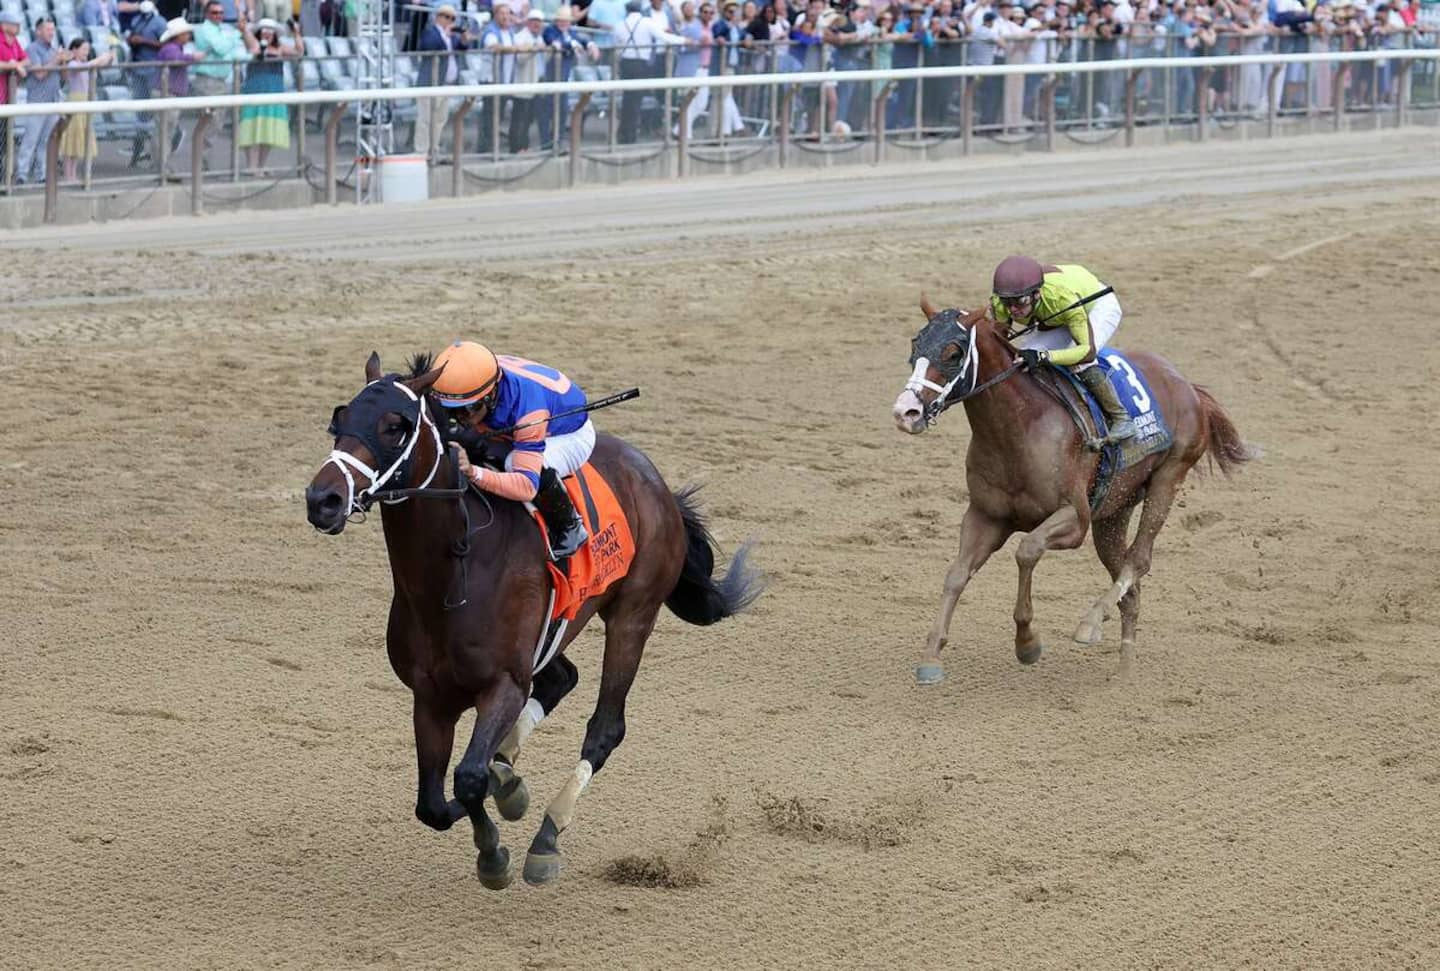 Horse racing: The favorite wins the Belmont Stakes